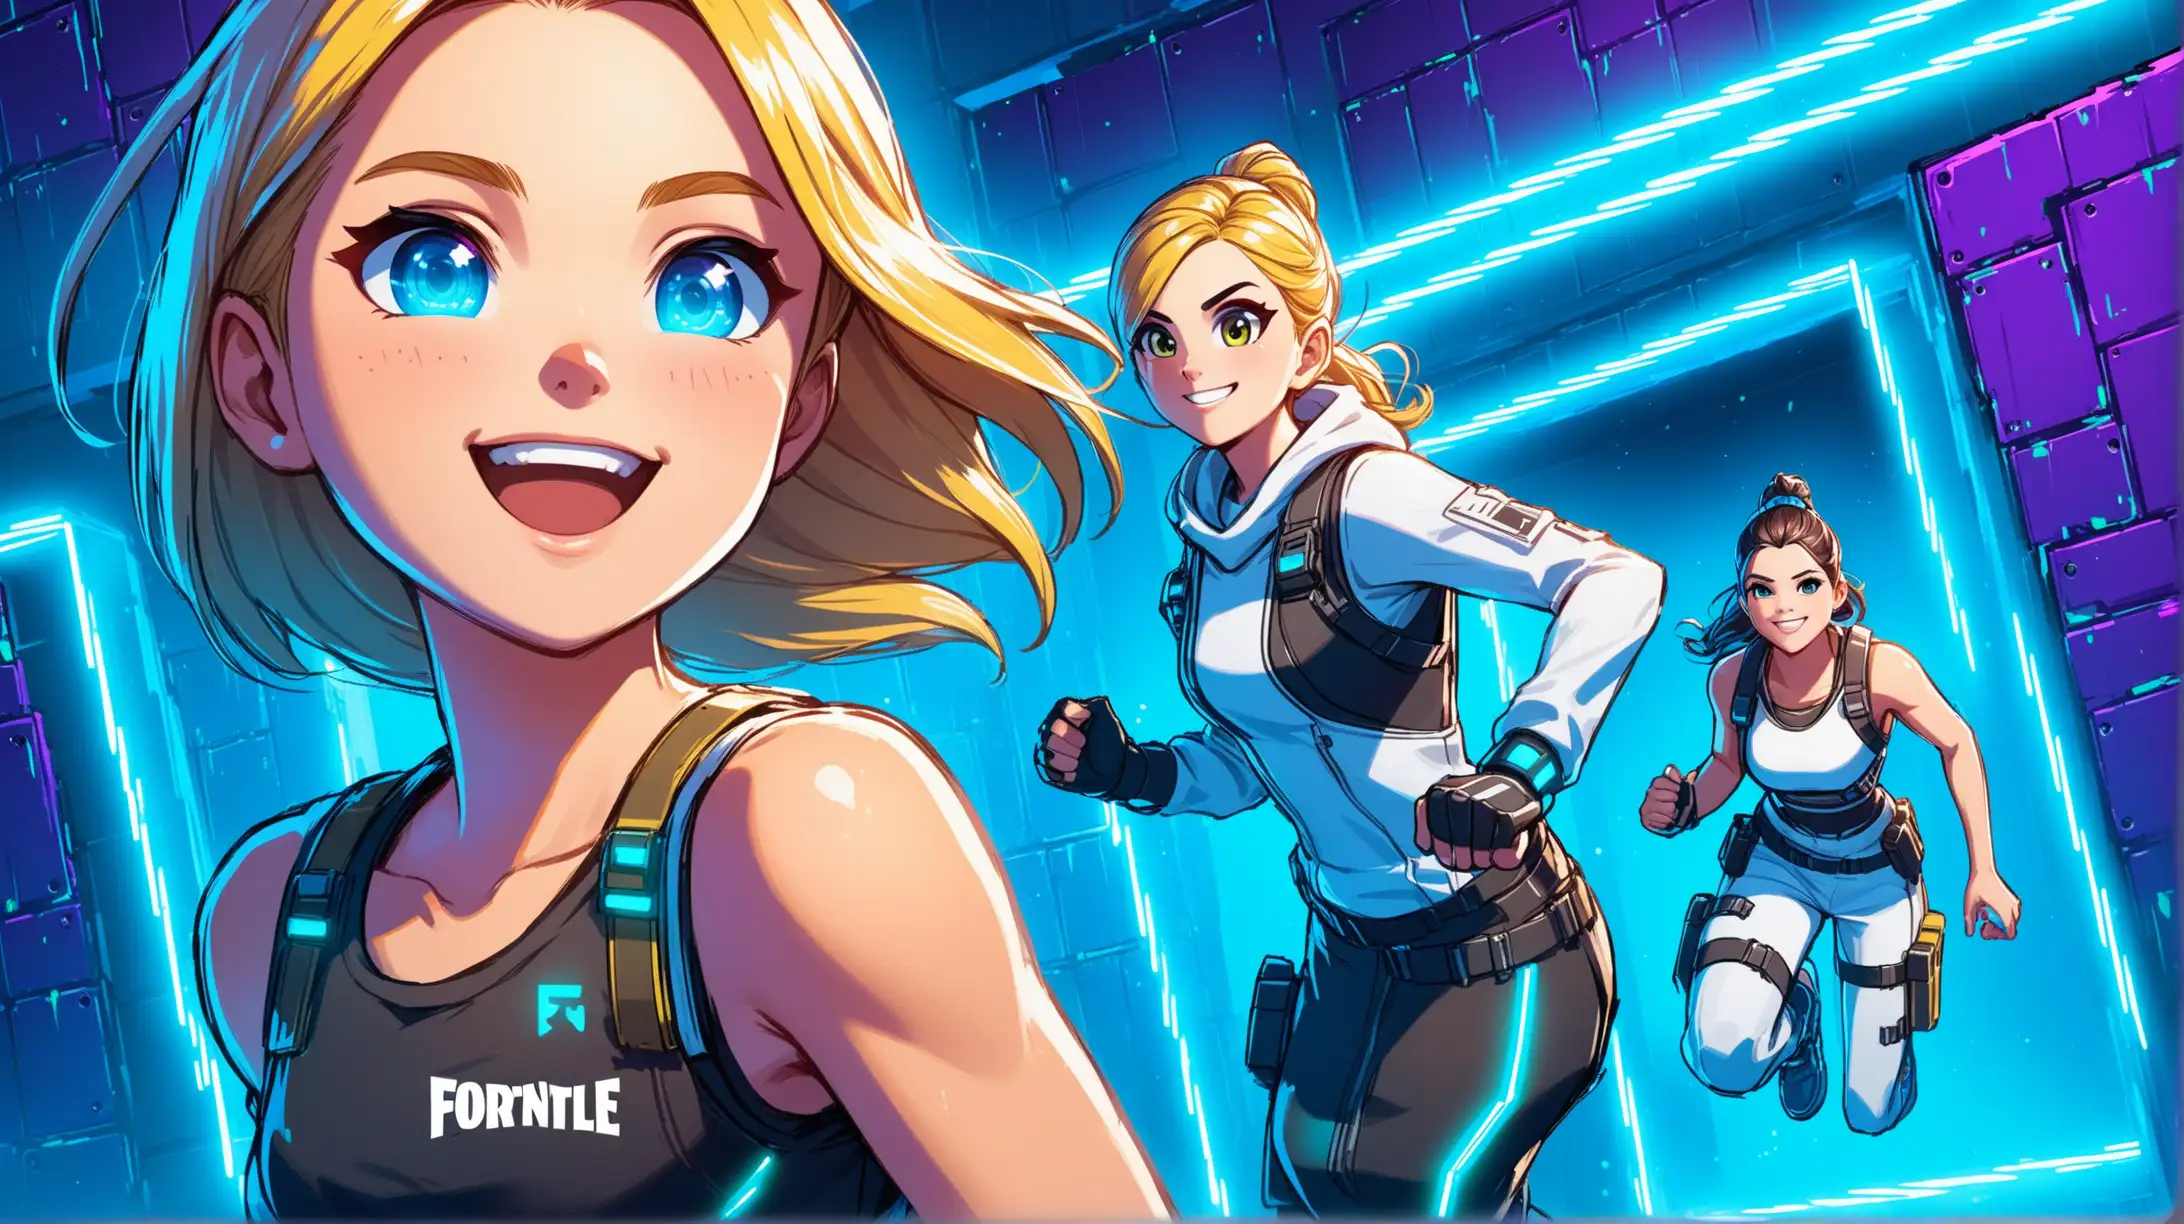 the theme is sci-fi with blue neon and metal walls,
draw two colorful Fortnite characters named John and Emma,
they are fully clothed,
these 2 characters are running an obstacle course,
they are smiling,
there are NO persons in the background,
Caucasian,
close-up.